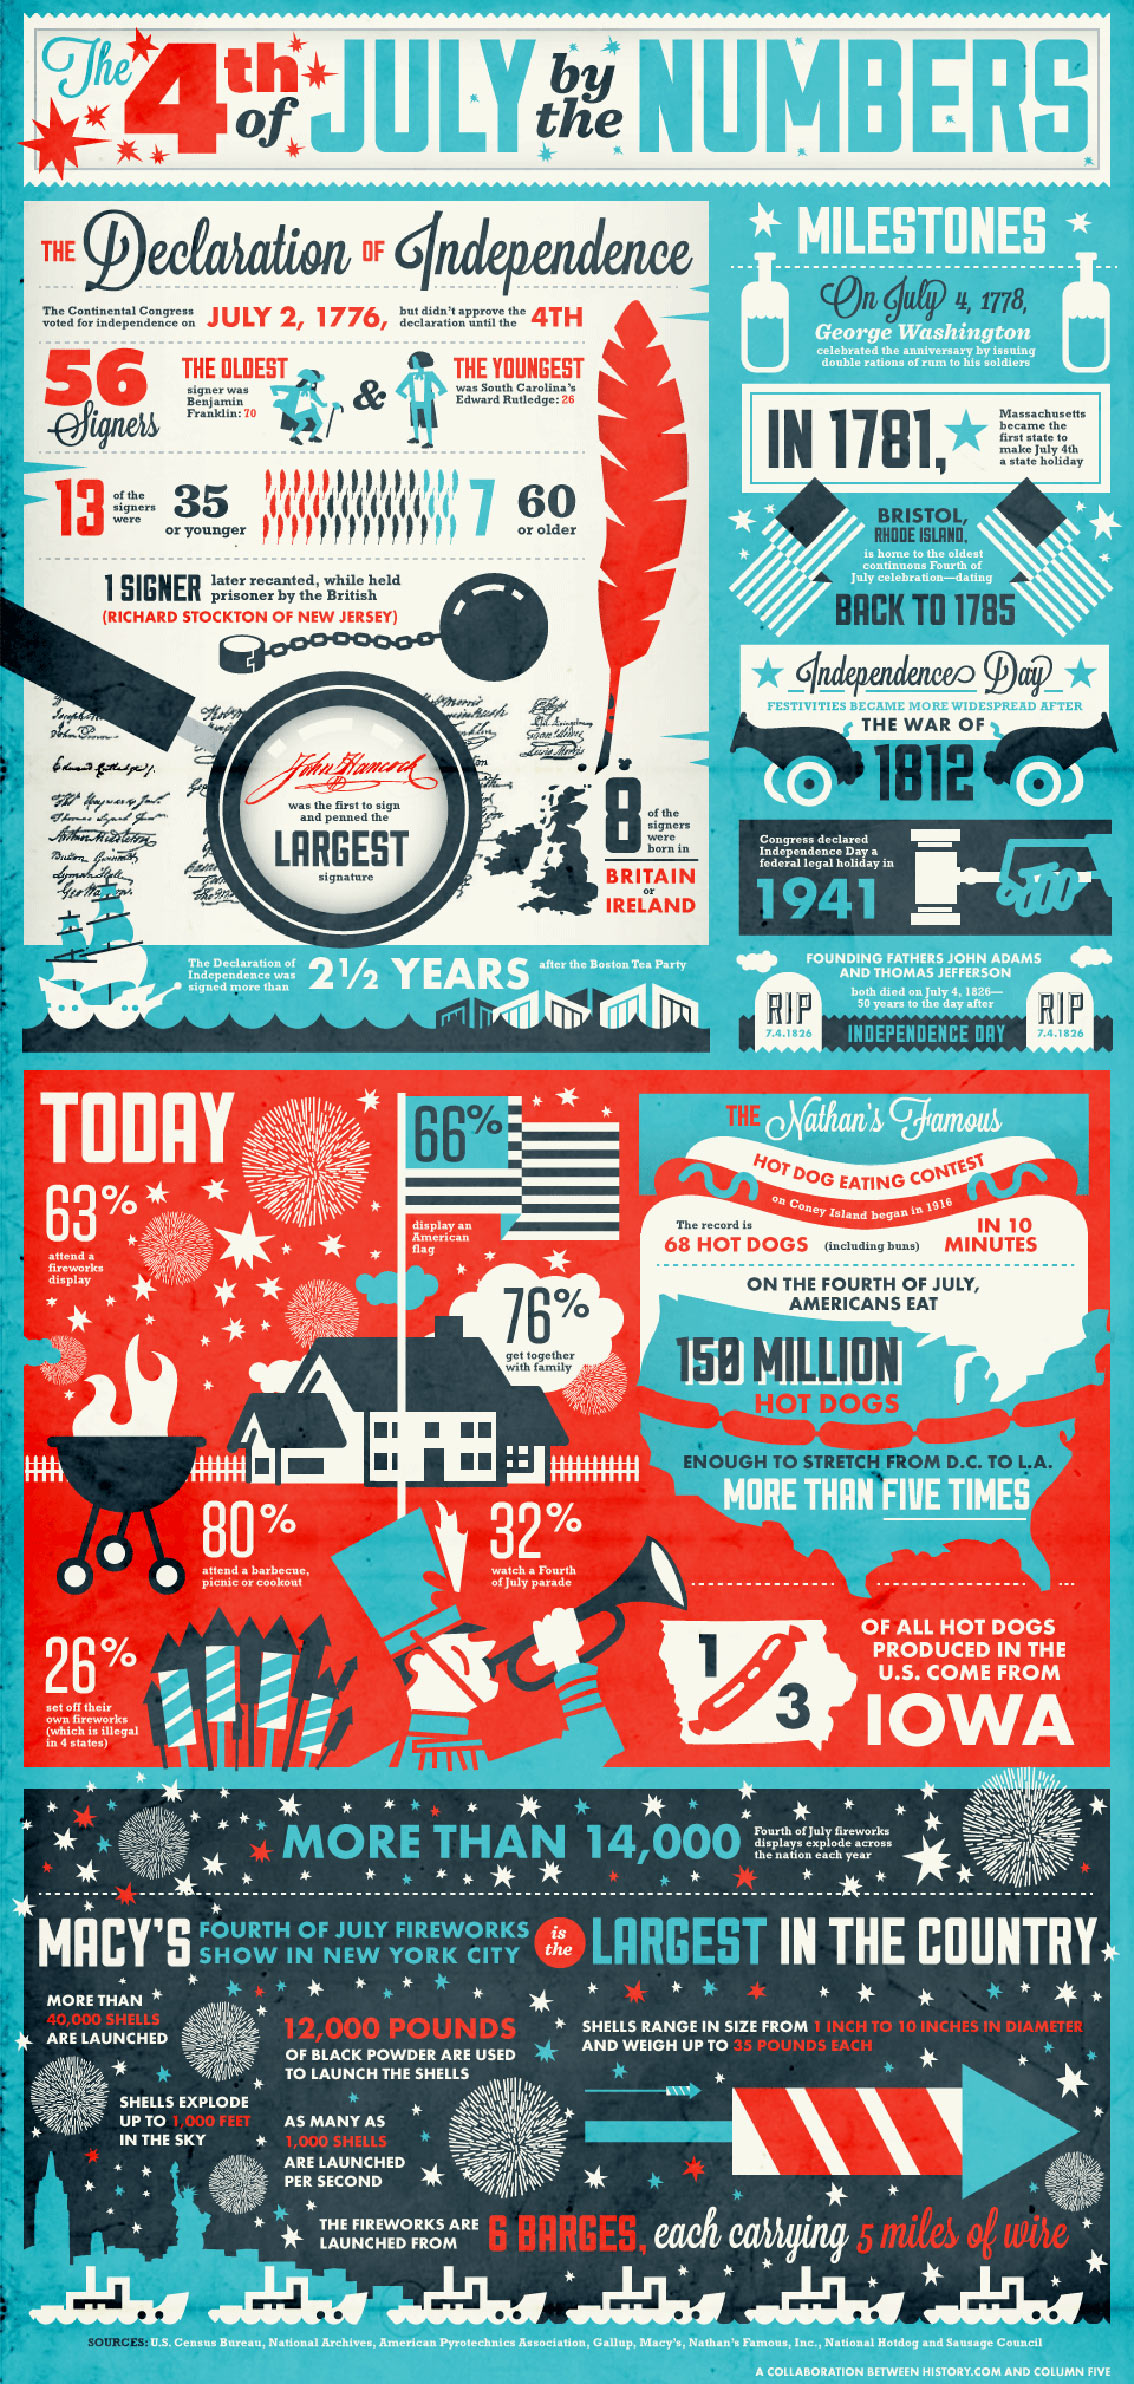 The 4th of July by the Numbers Infographic